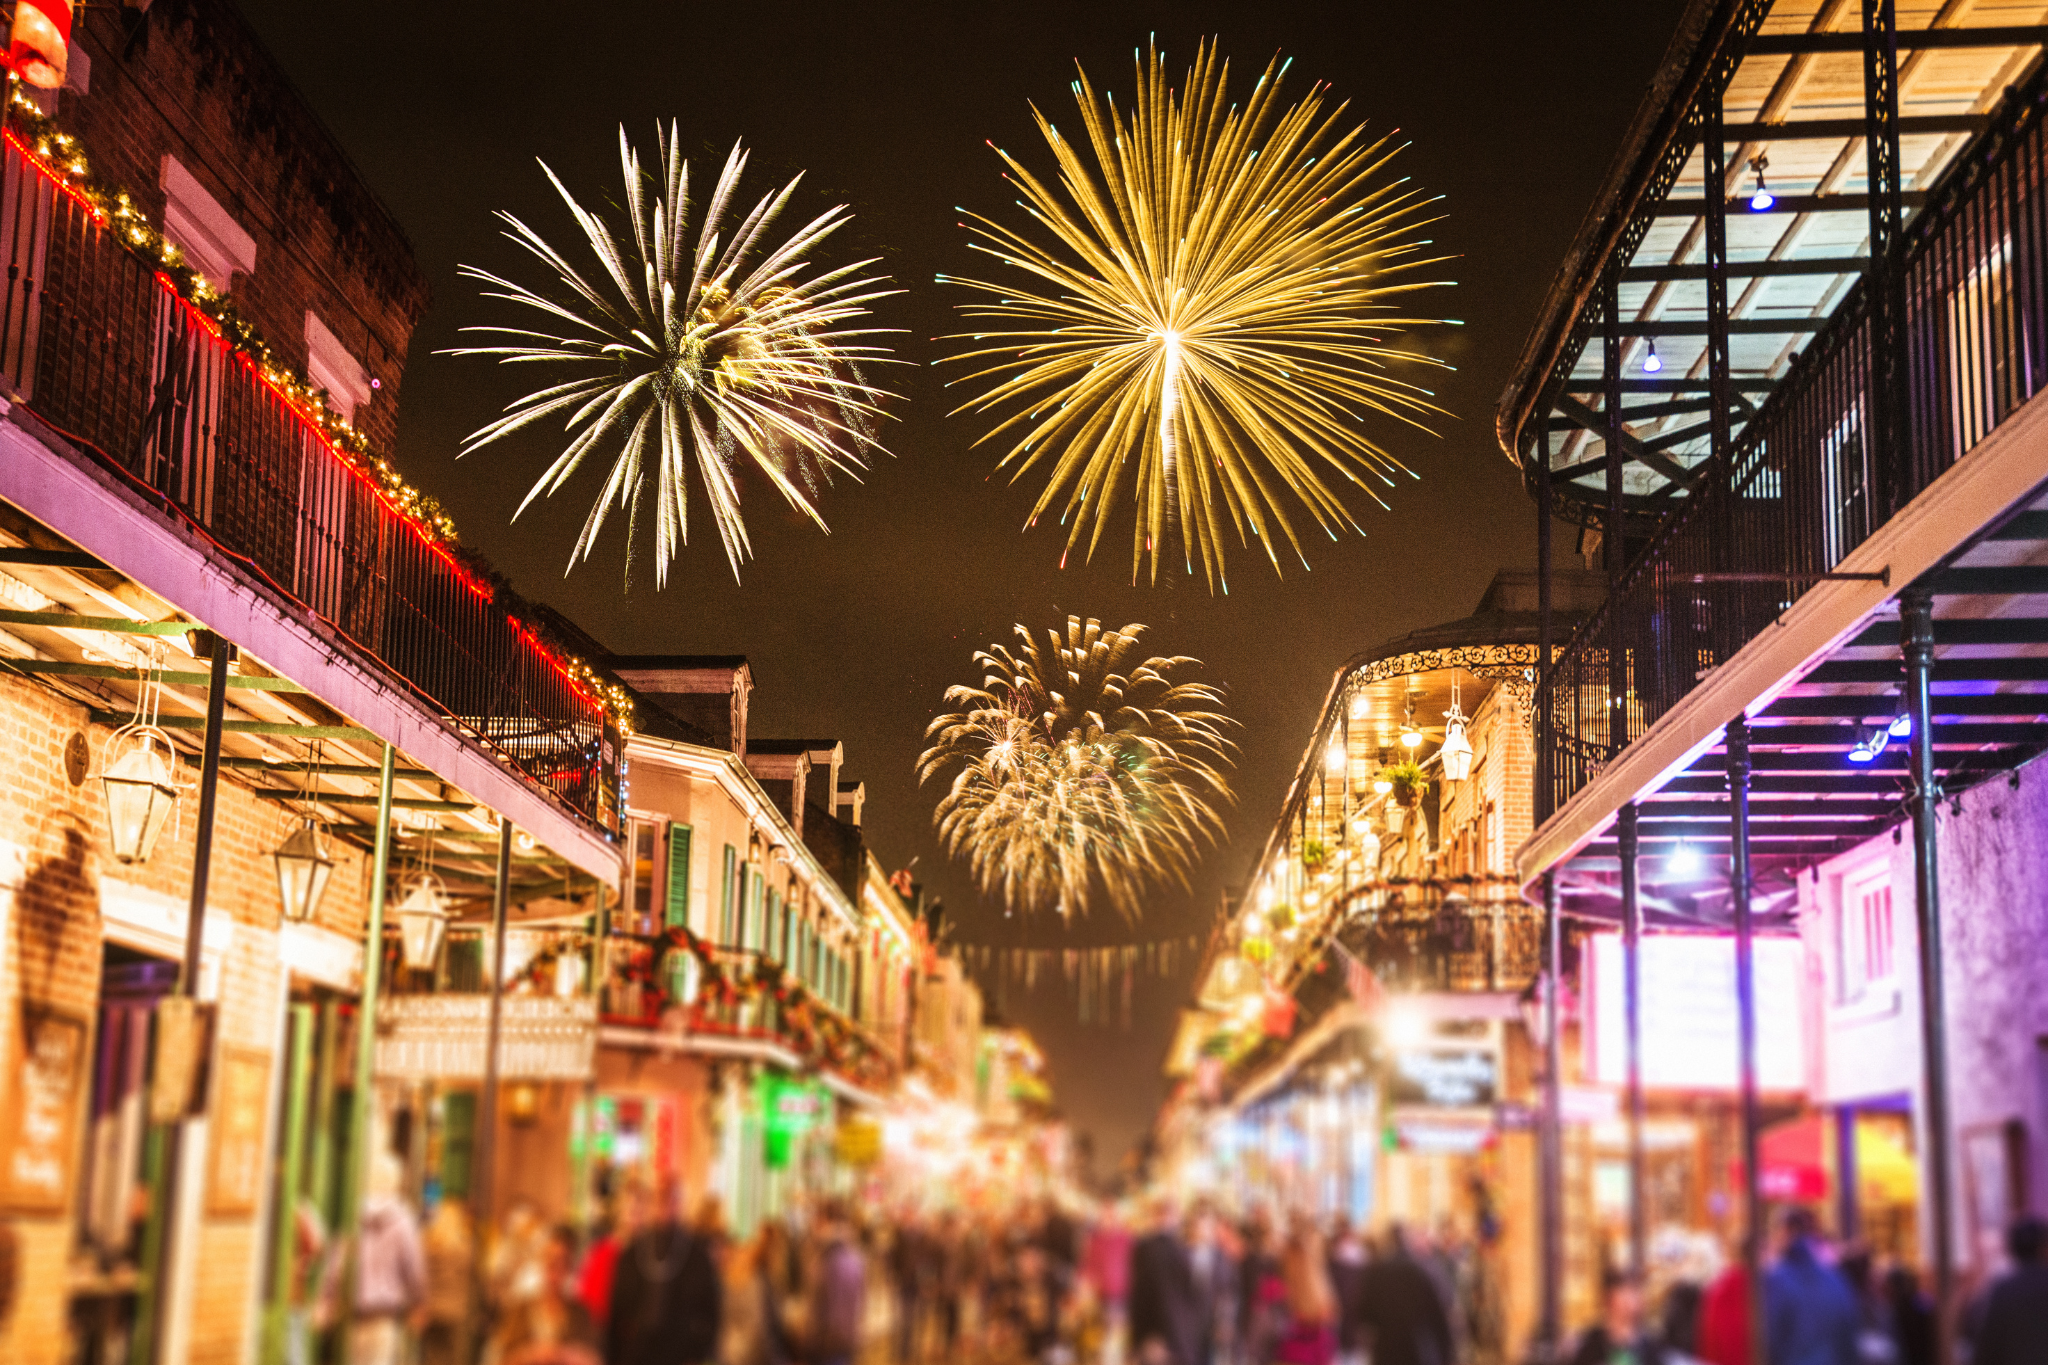 Ring in the 2020 New Orleans Holiday Season